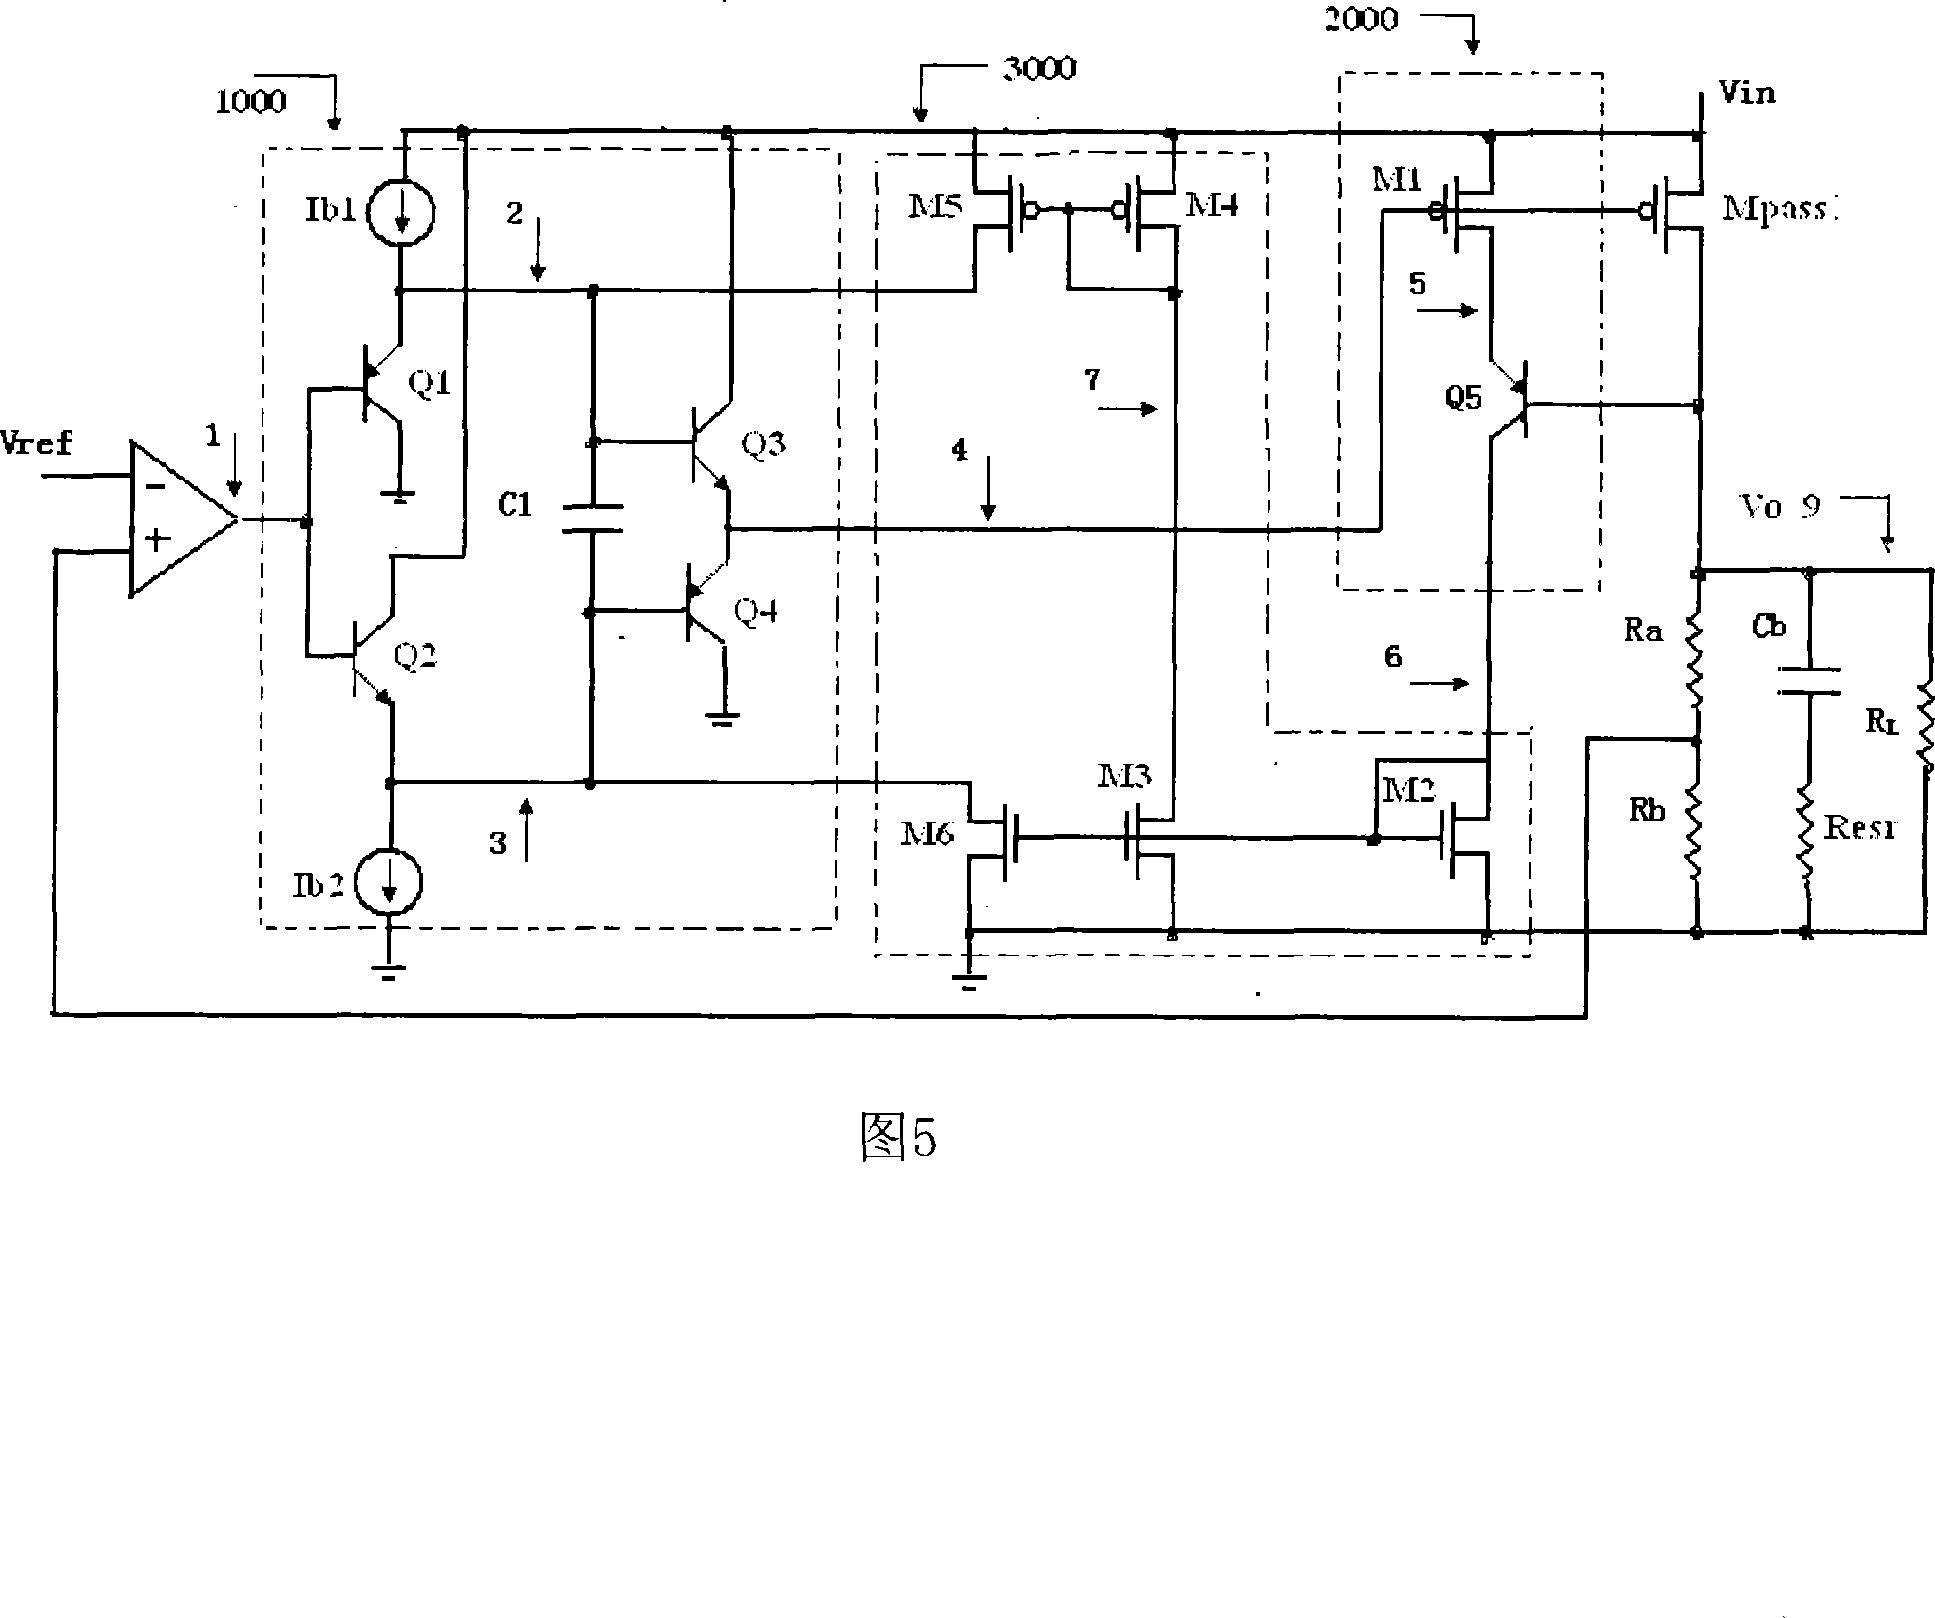 Voltage buffer circuit for linear potentiostat